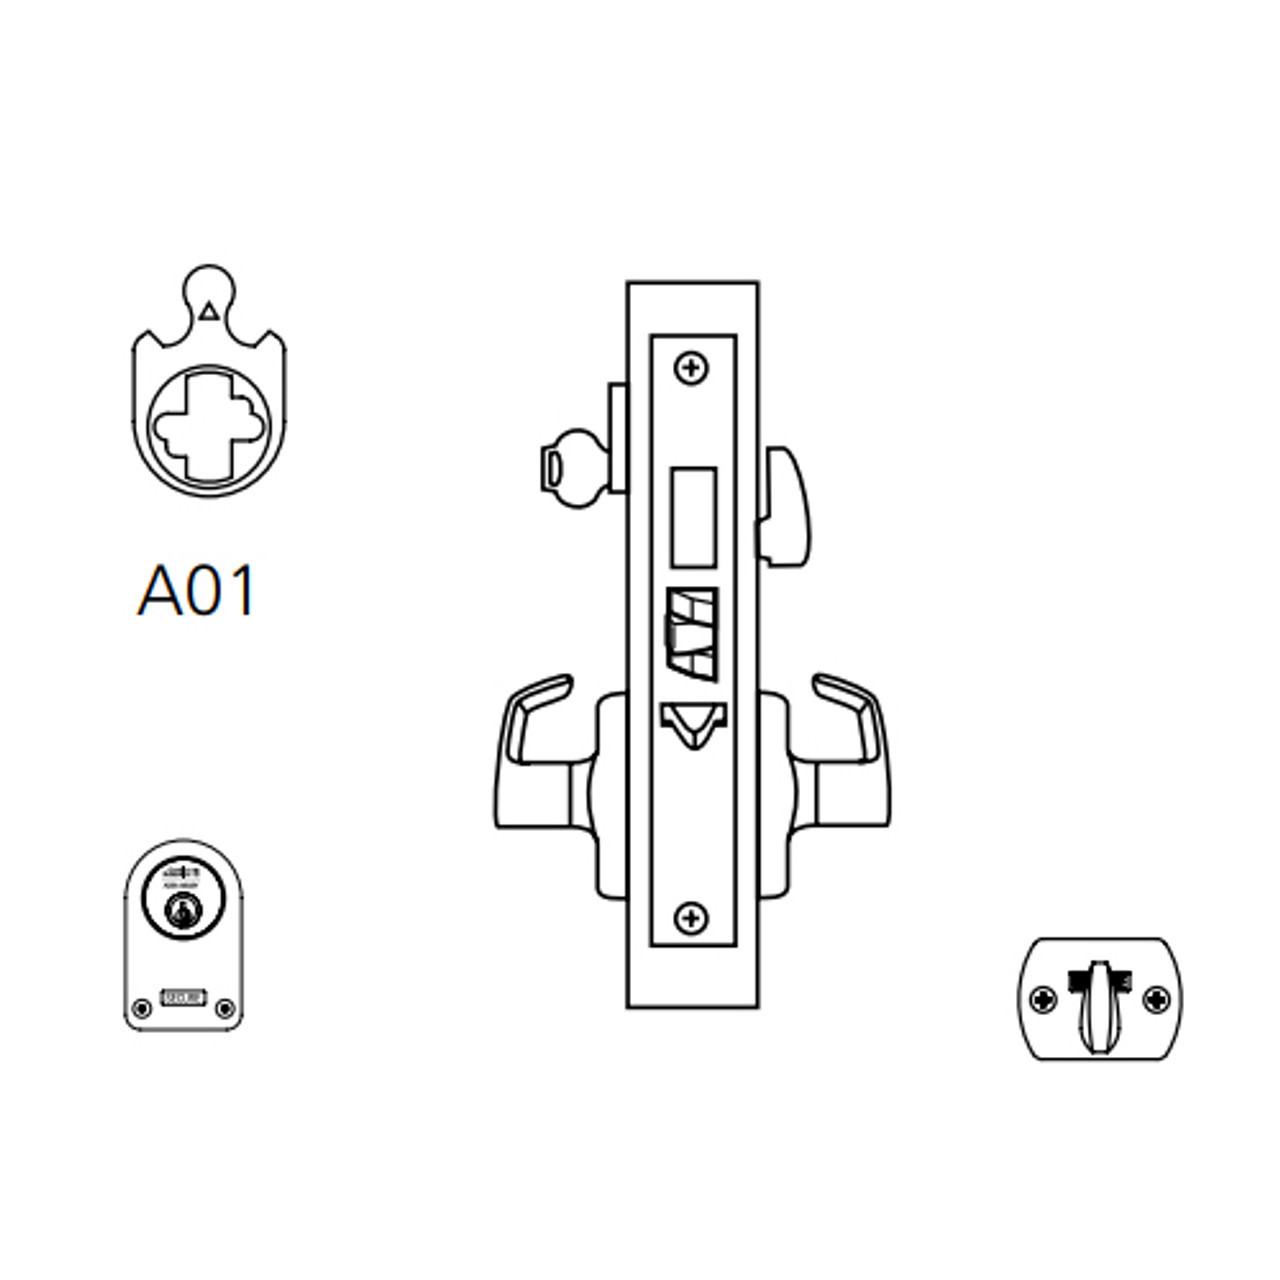 ML2075-LSP-605-CL7 Corbin Russwin ML2000 Series IC 7-Pin Less Core Mortise Entrance or Office Security Locksets with Lustra Lever and Deadbolt in Bright Brass